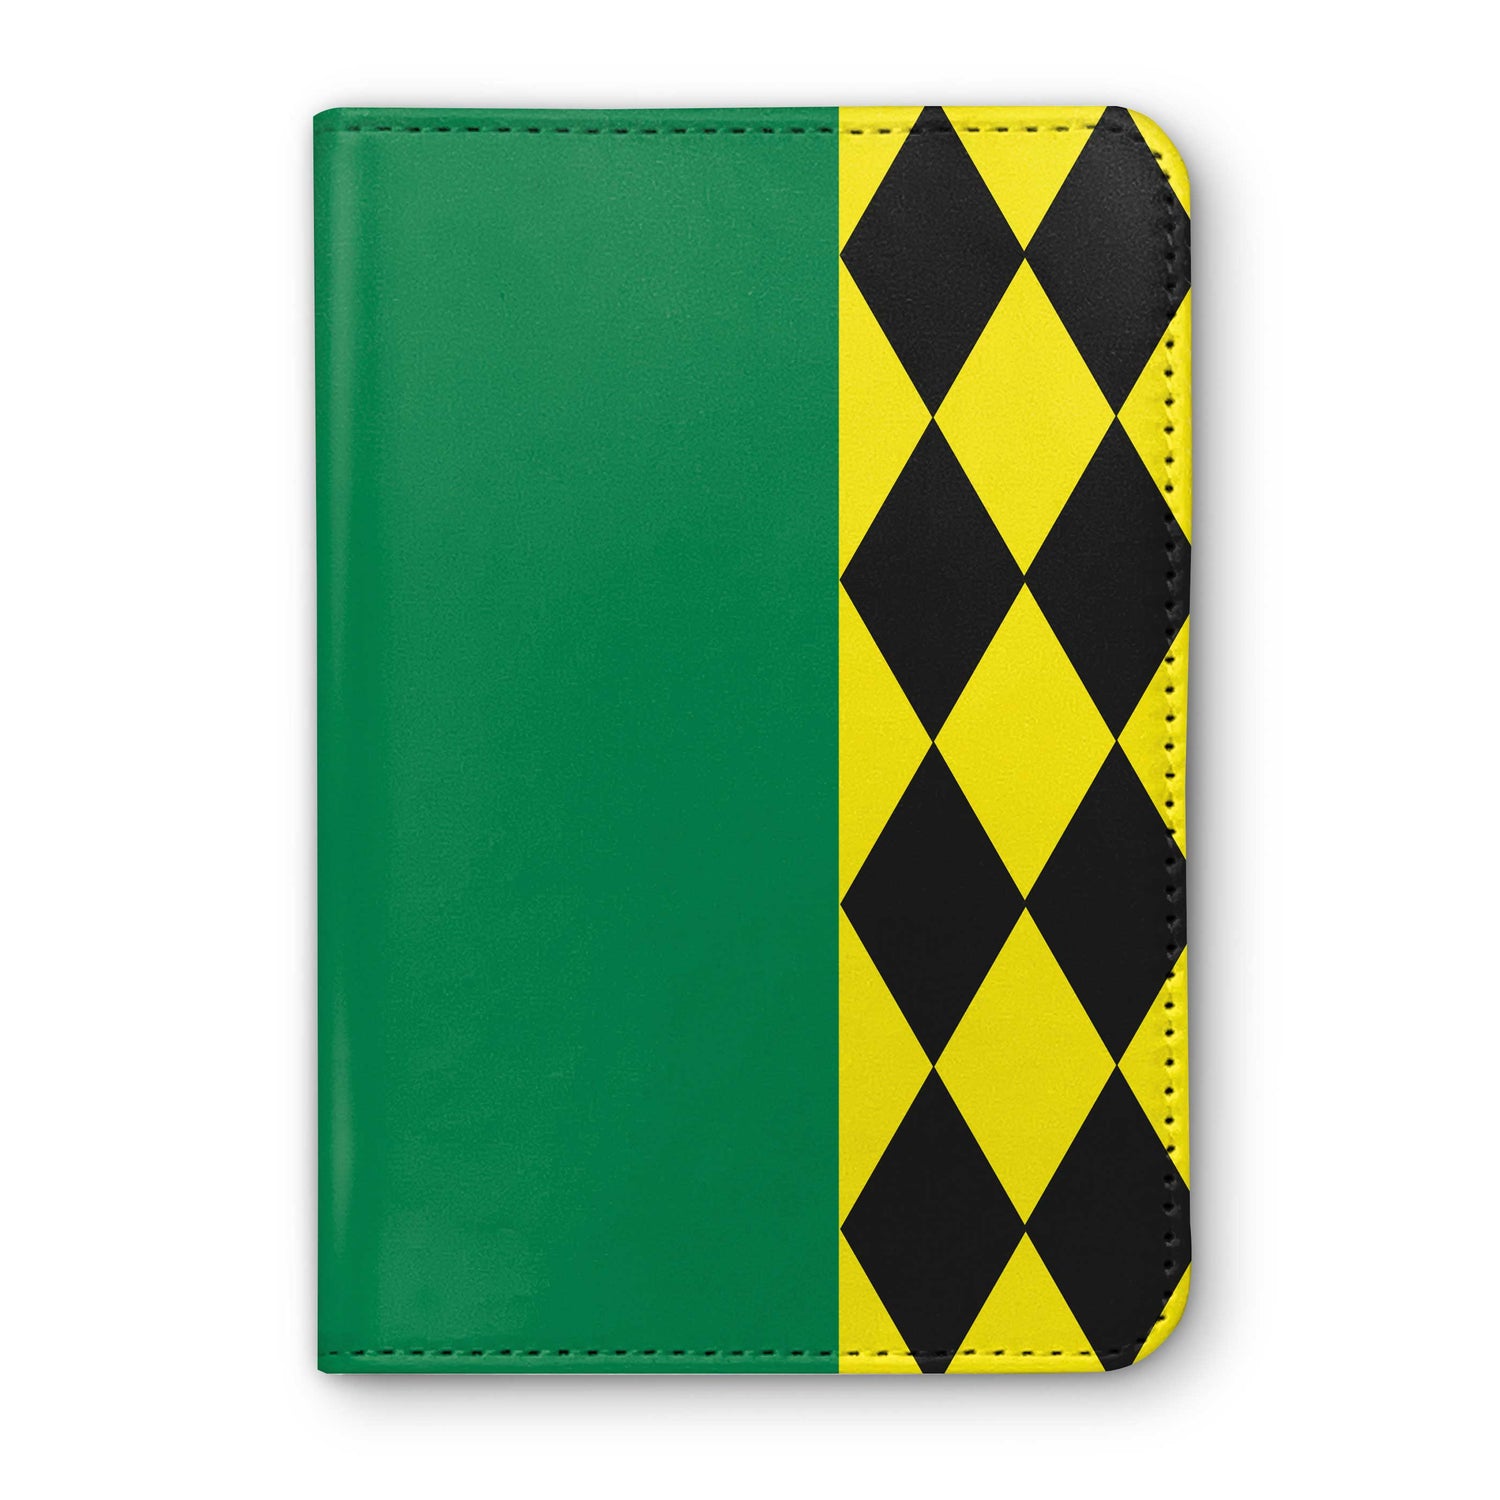 Racing For Fun Horse Racing Passport Holder - Hacked Up Horse Racing Gifts